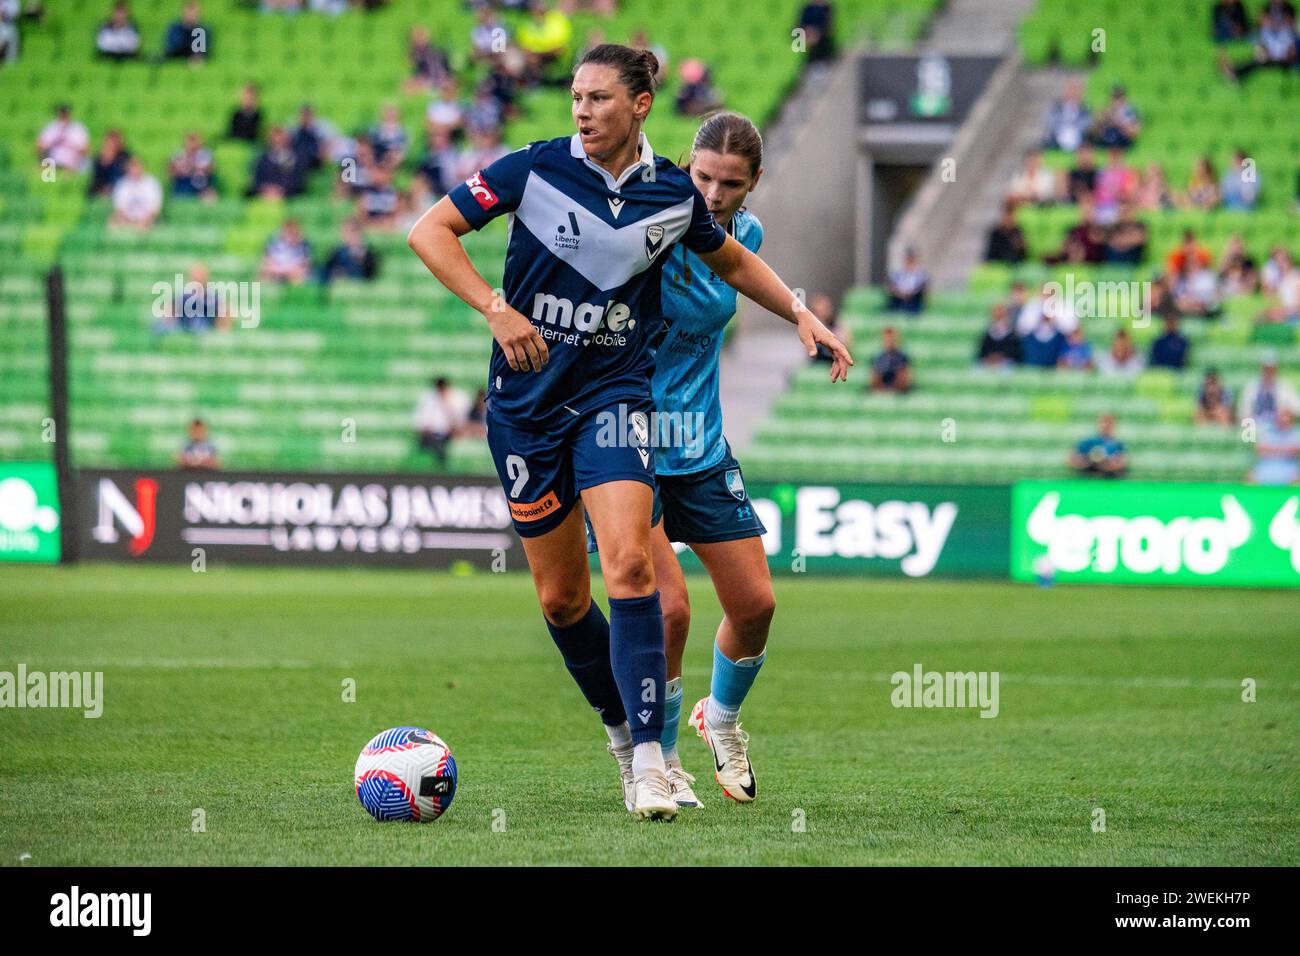 Melbourne, Australia. 26 January, 2024. Melbourne Victory FC Forward Emily Gielnik (#9) looks for a pass during the Liberty A-League Women’s match between Melbourne Victory FC and Sydney FC at AAMI Park in Melbourne, Australia. Credit: James Forrester/Alamy Live News Stock Photo